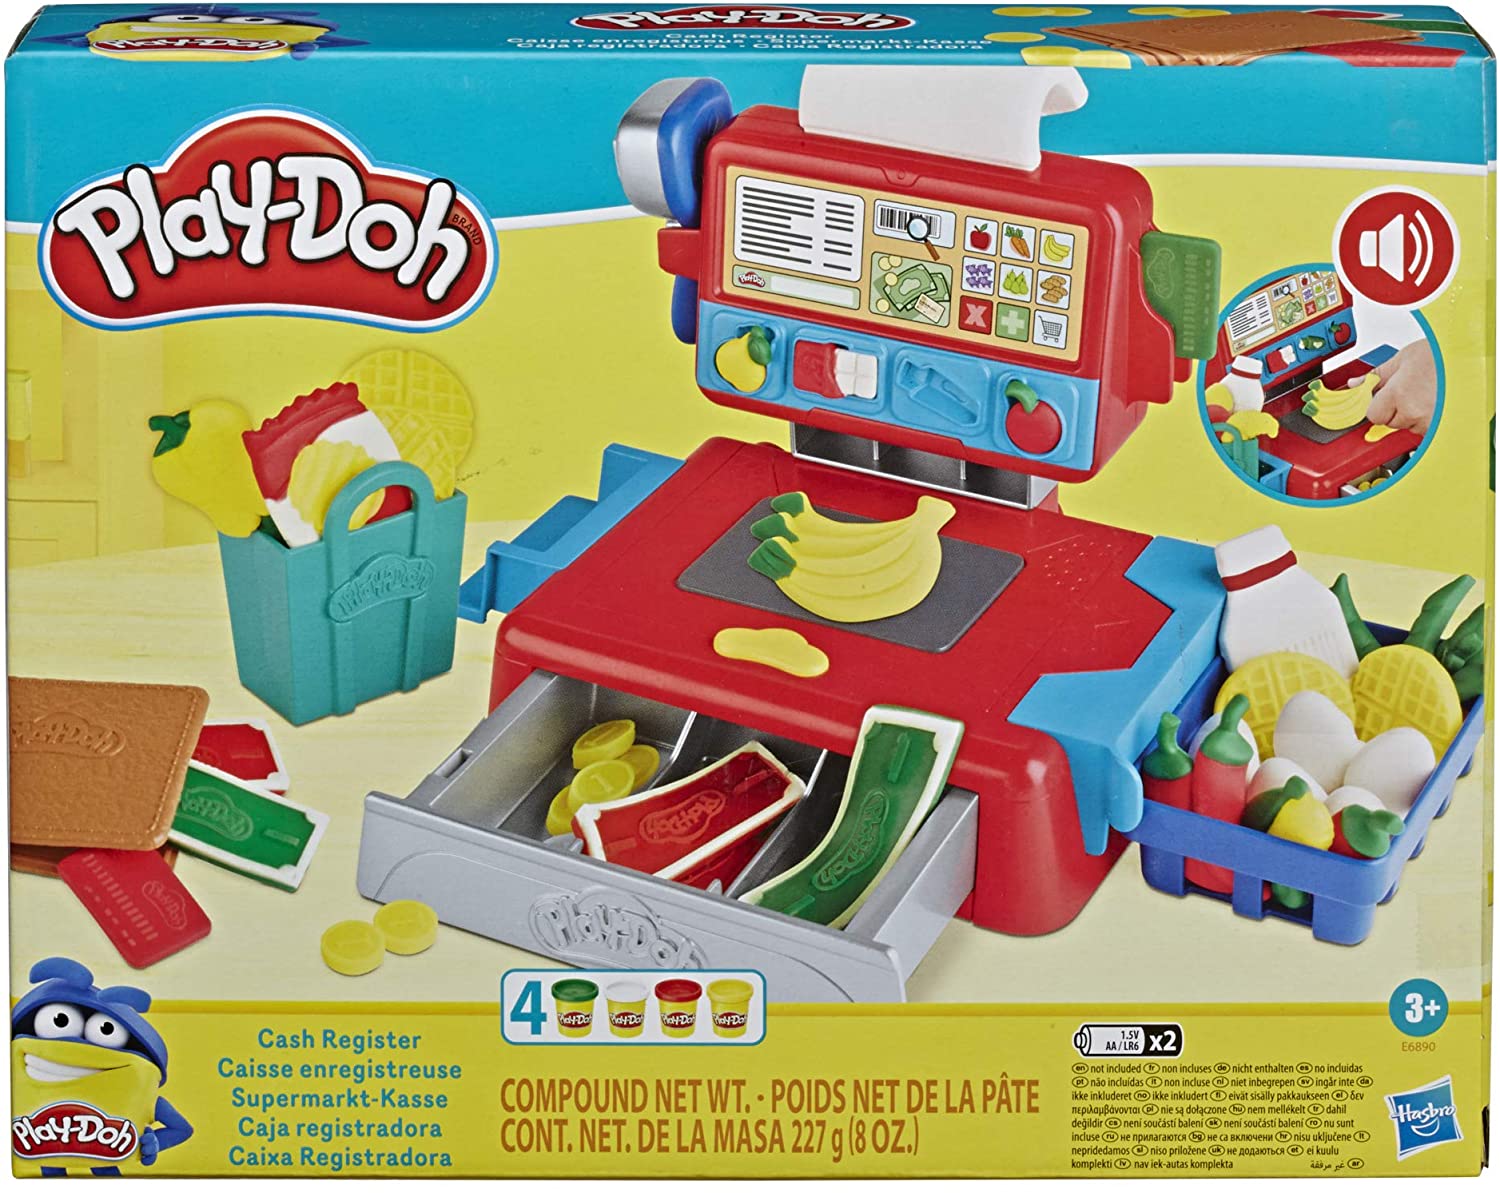 Play-Doh Cash Register Toy for Kids 3 Years and up with Fun Sounds, Play Food Accessories and 4 Non-Toxic Colors - image 1 of 4